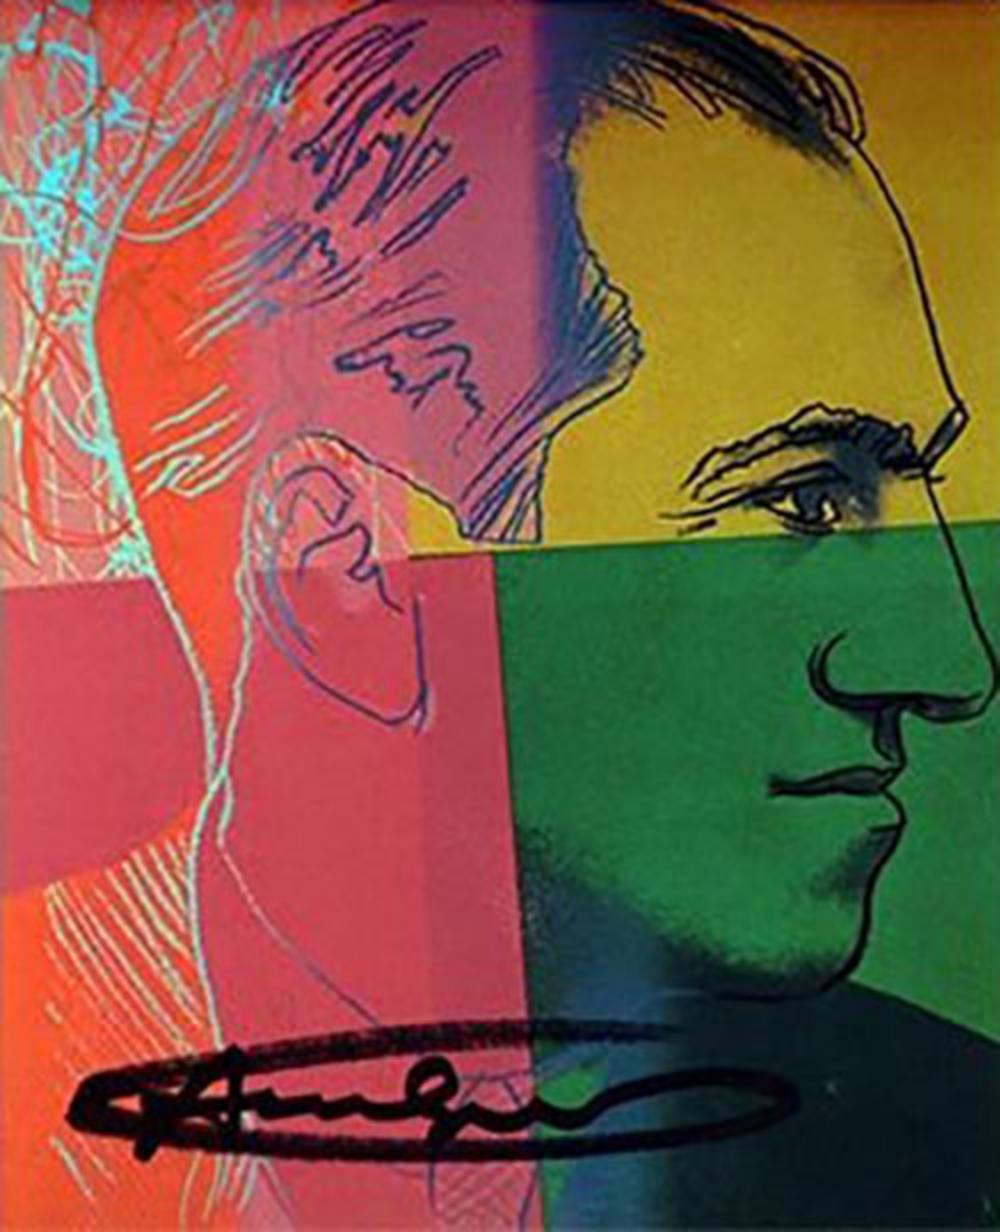 Andy Warhol TEN PORTRAITS OF JEWS OF THE TWENTIETH CENTURY (10 Card Set) EXHIBITION Each piece is hand signed, offset lithograph Paper Size: 7 x 5.1/2 inches each Image: 6